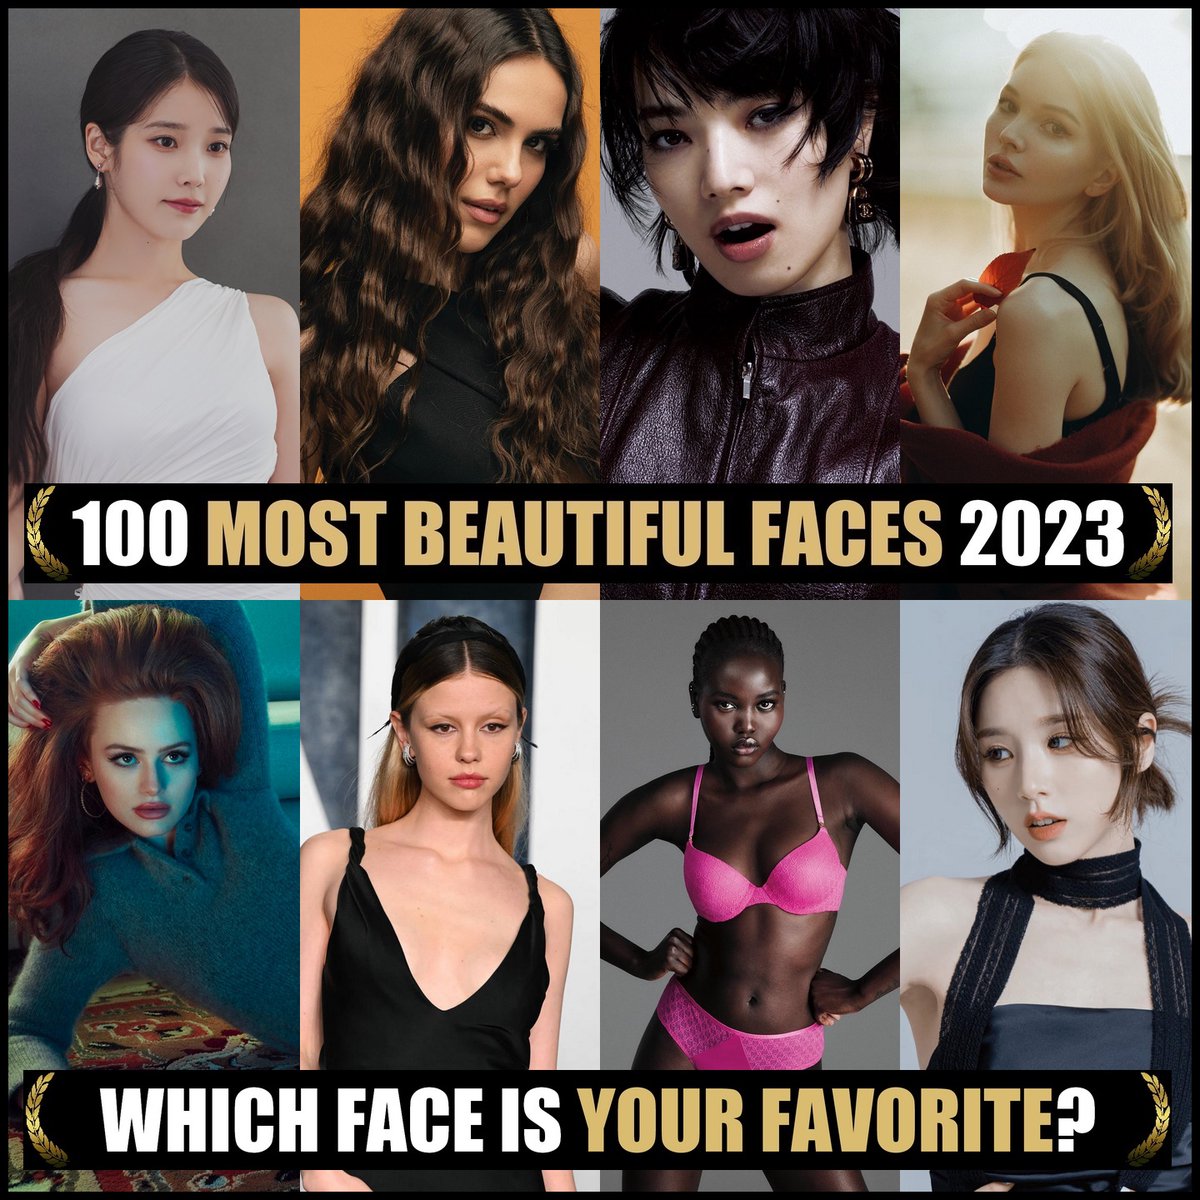 Nominations: 100 Most Beautiful Faces 2023. Congrats! Would you like to nominate & vote? Please join our Patreon club (Link Bio) #TCCandler #100faces2023 #IU #ozgukaya #nanakomatsu #lilijohansson #madelainepetsch #miagoth #adutakech #HeeJin #ARTMS #loona